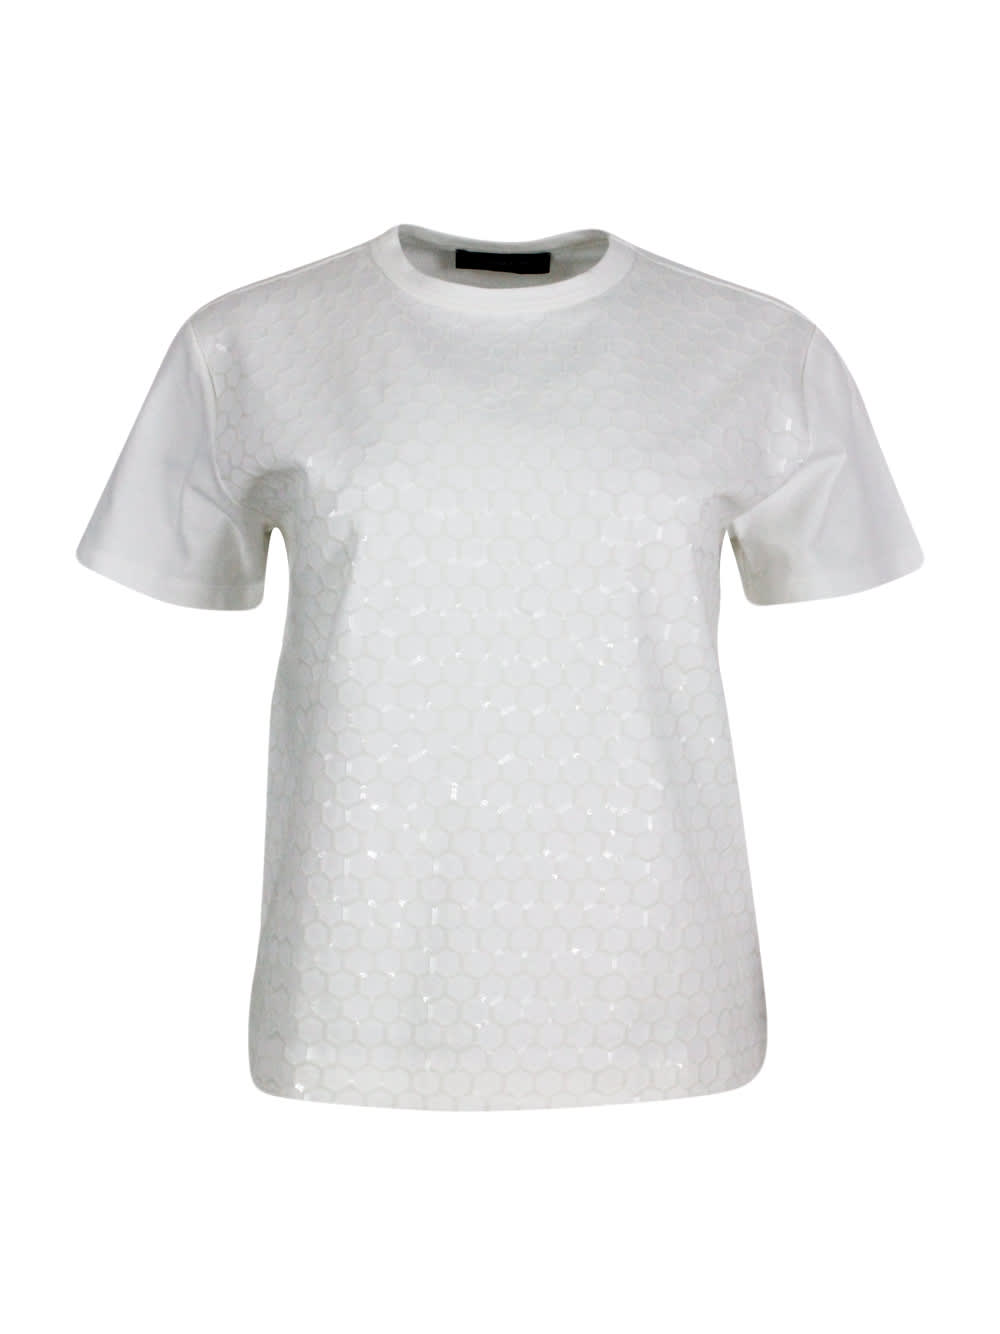 Shop Fabiana Filippi Crew-neck, Short-sleeved T-shirt Made Of Soft Cotton Embellished With Sequin Applications That Give  In White